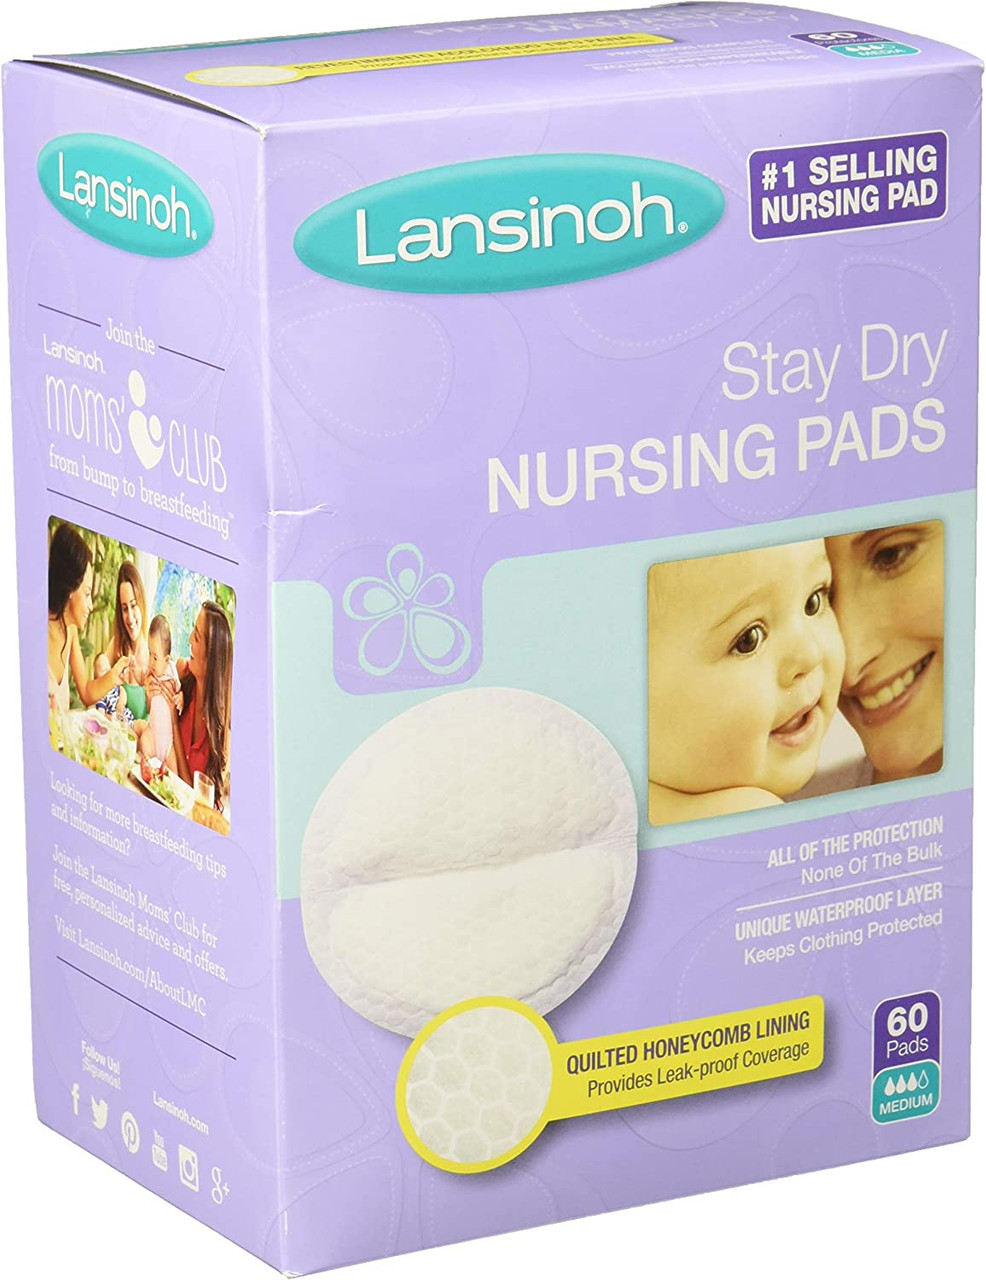 Lansinoh Stay Dry Disposable Nursing Pads for Breastfeeding, 108 Pads